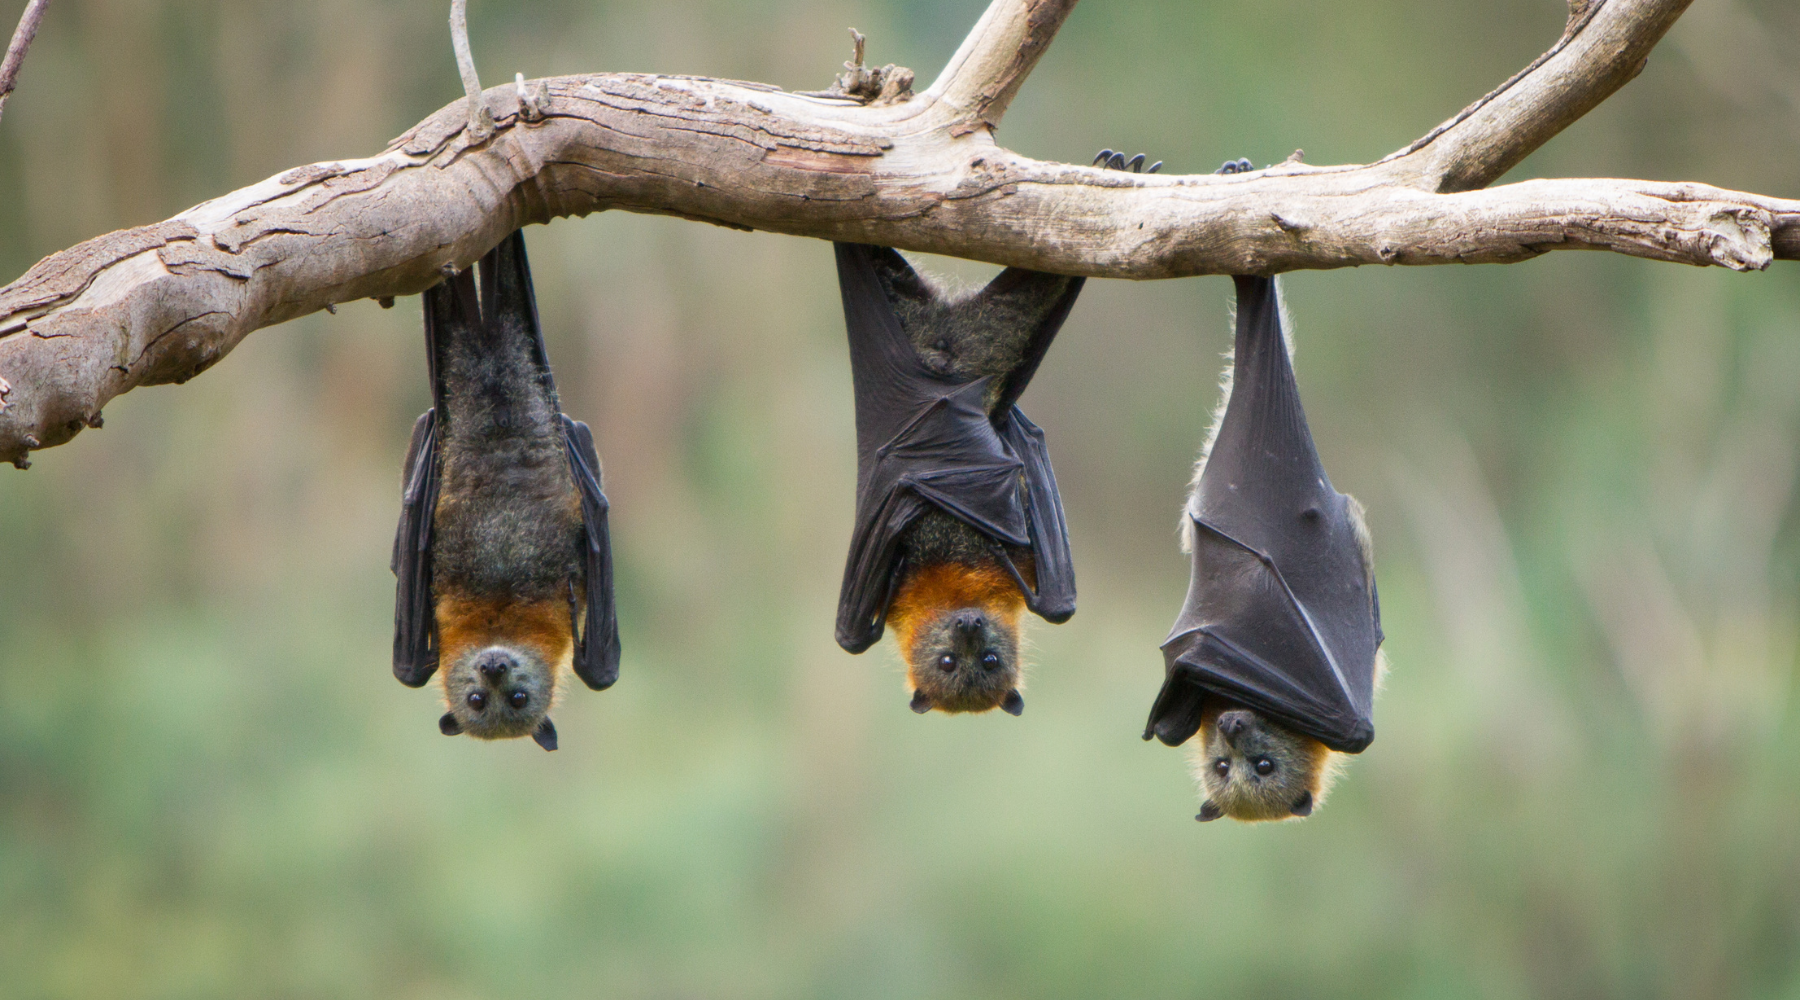 Three bats hanging from a branch in a forest